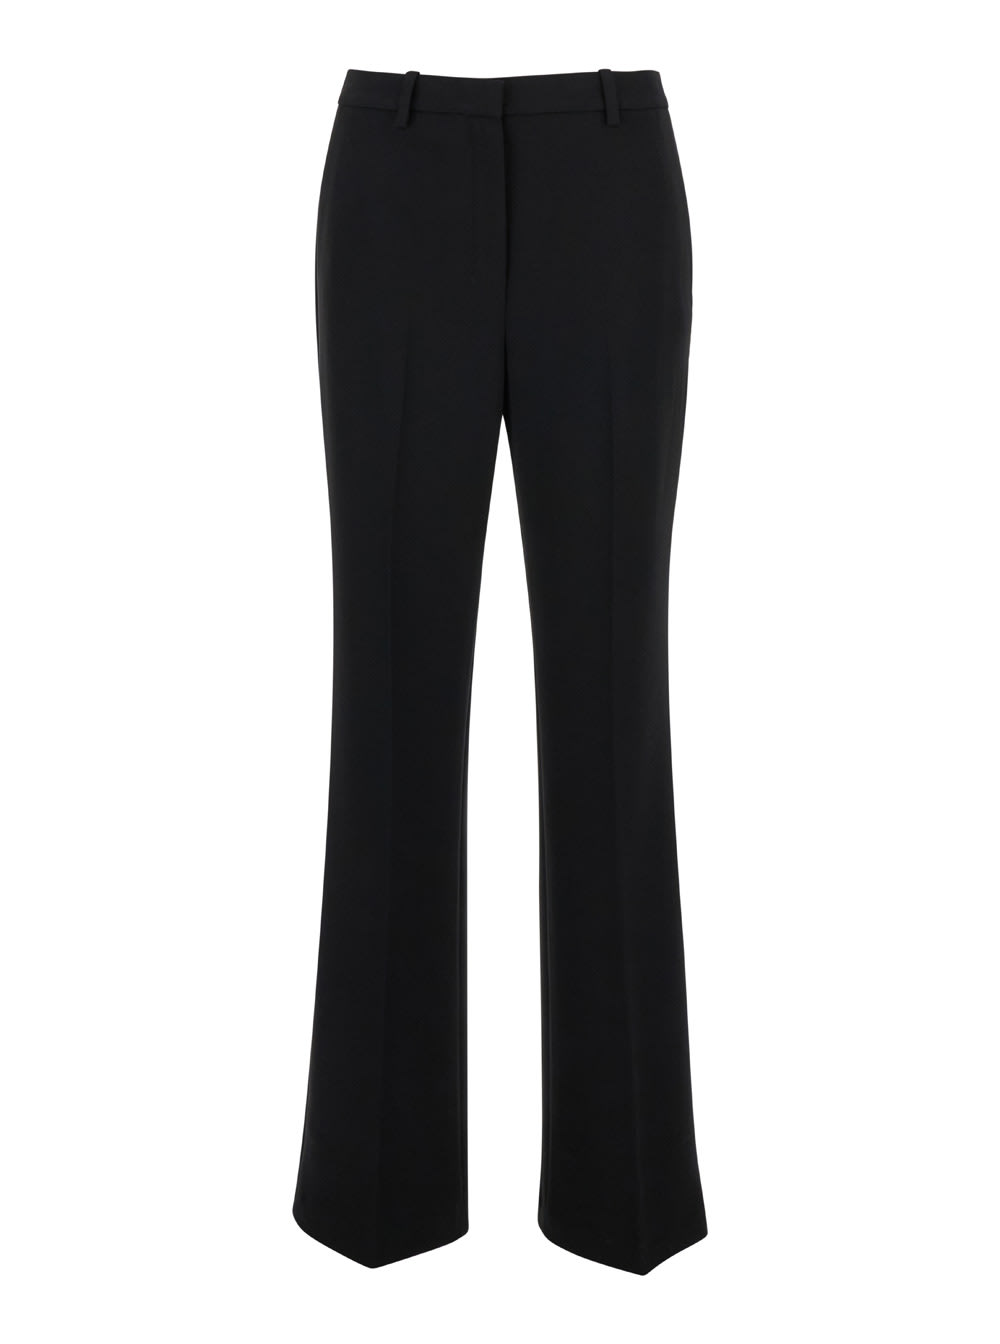 Theory Black Sartorial Pants With Stretch Pleat In Technical Fabric Woman - Black - female - Size: 4